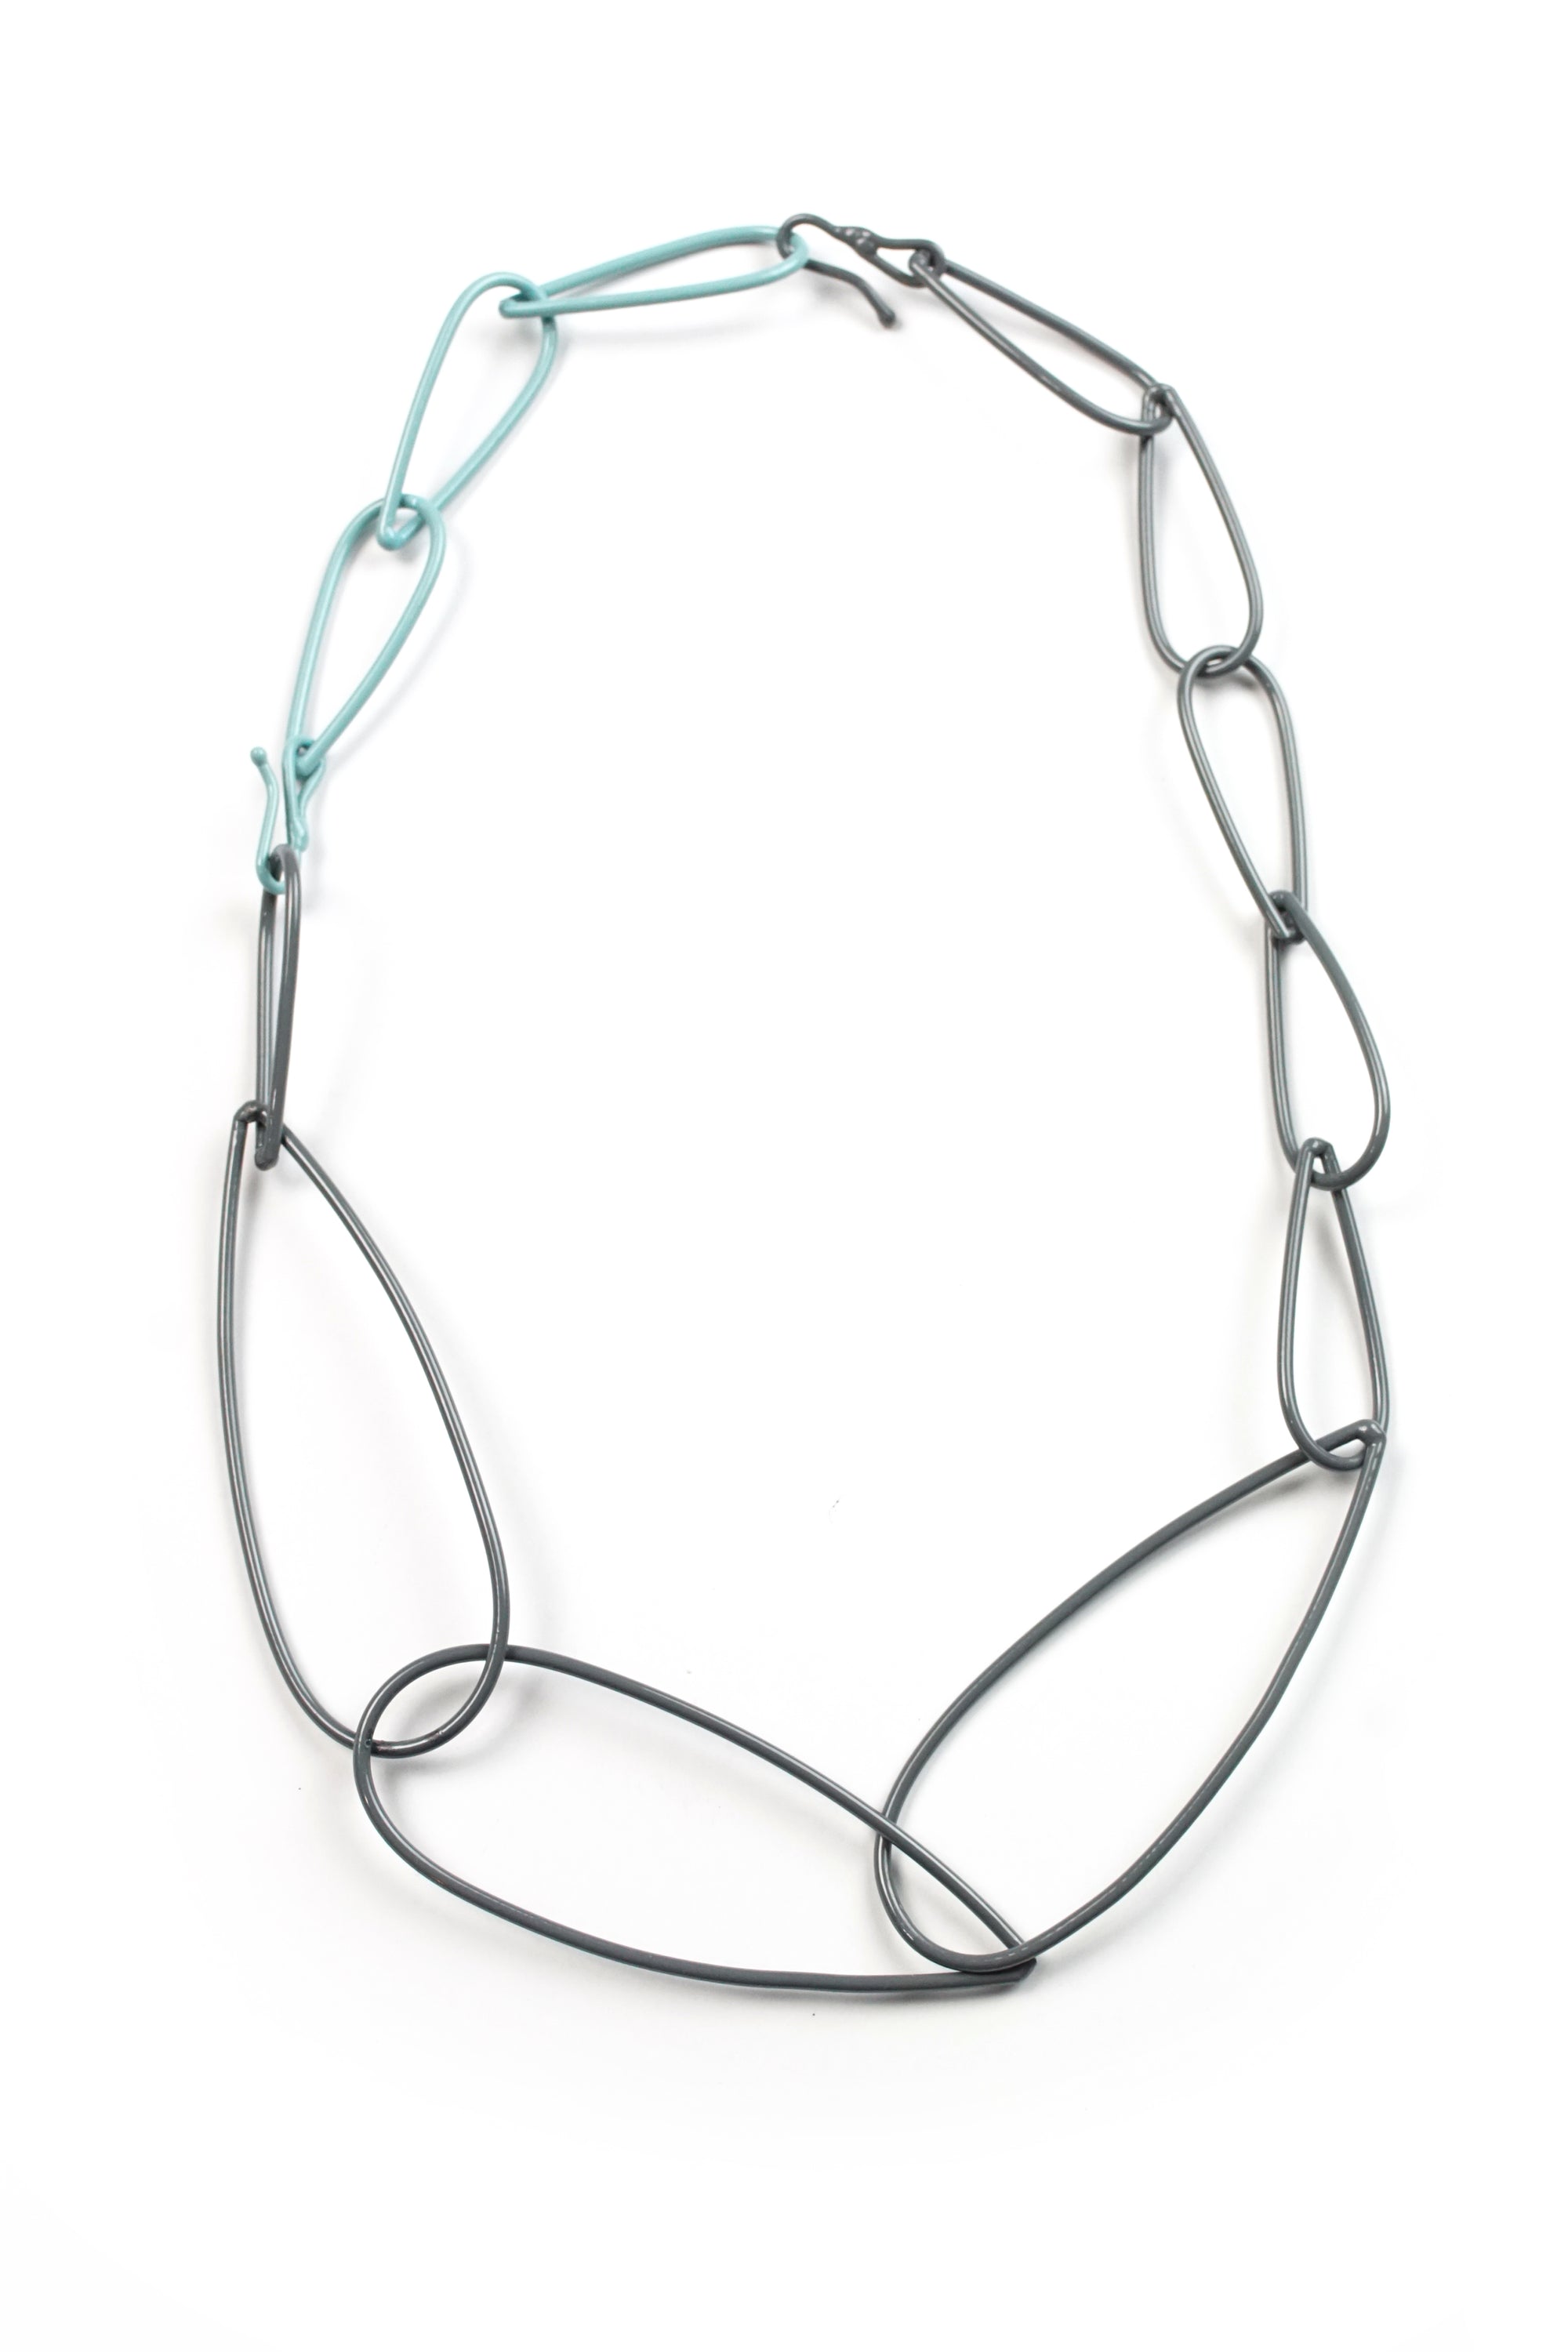 Modular Necklace in Storm Grey and Faded Teal